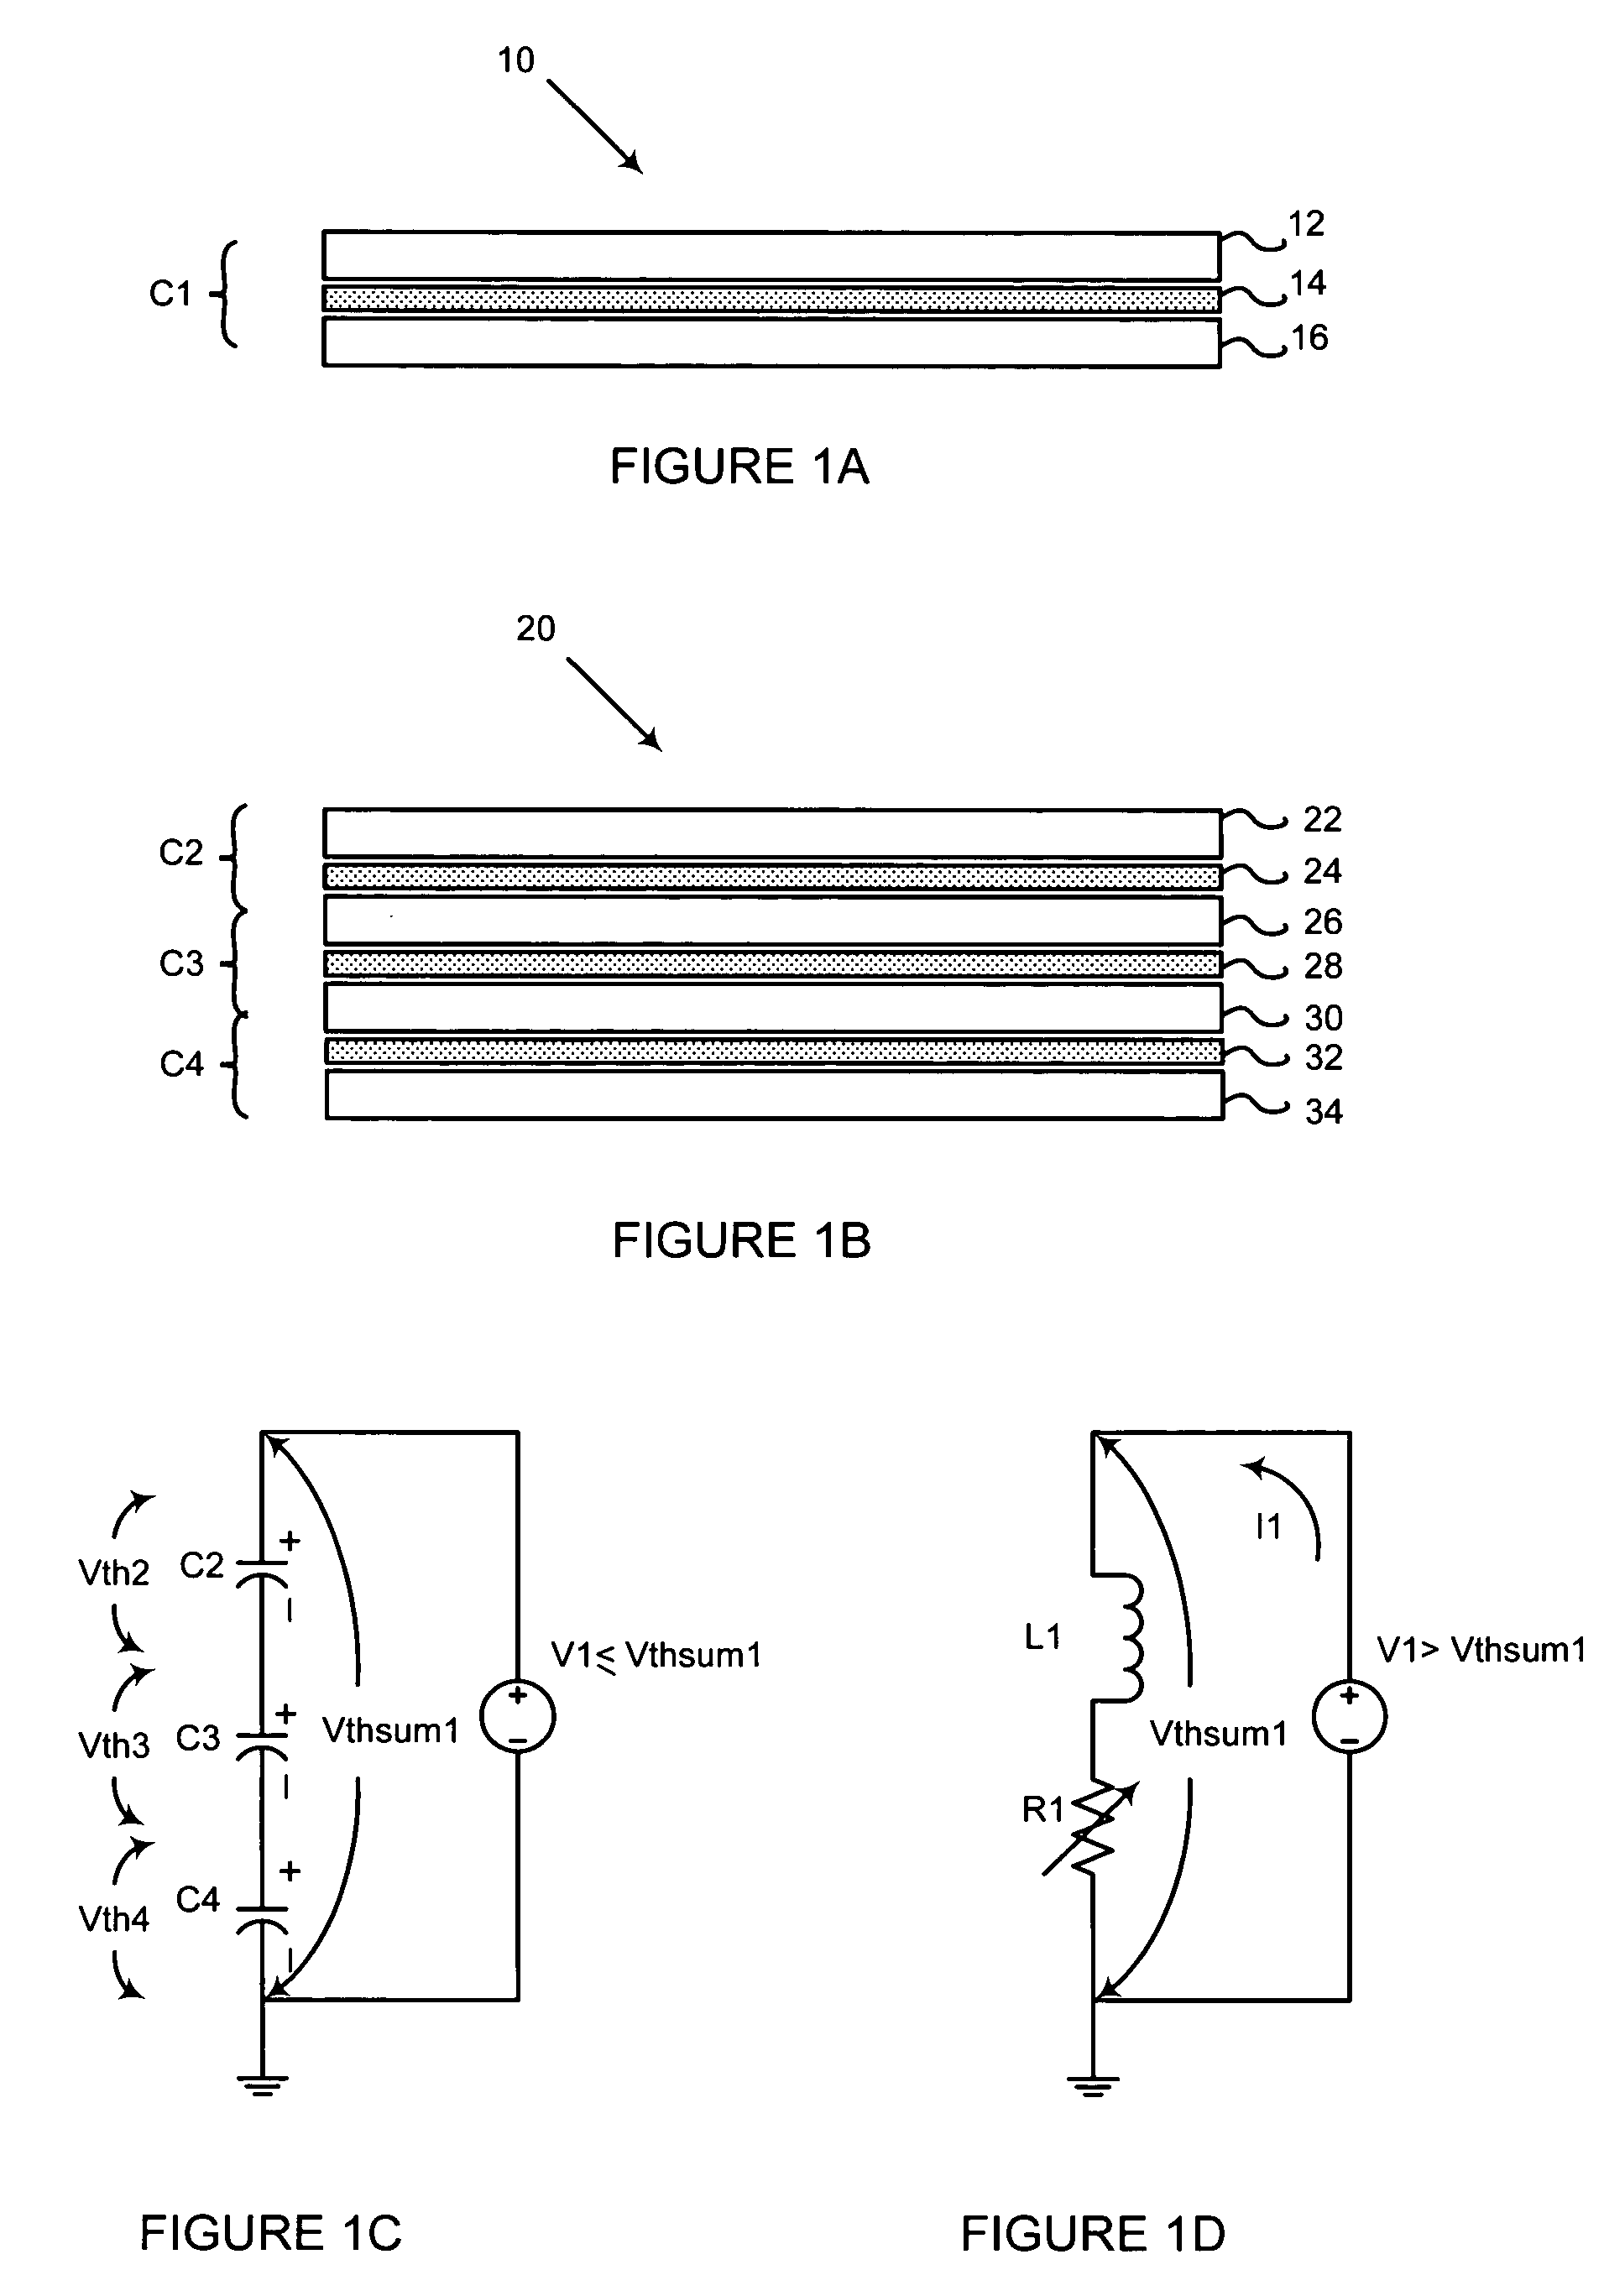 Electrostatic discharge mitigation structure and methods thereof using a dissipative capacitor with voltage dependent resistive material